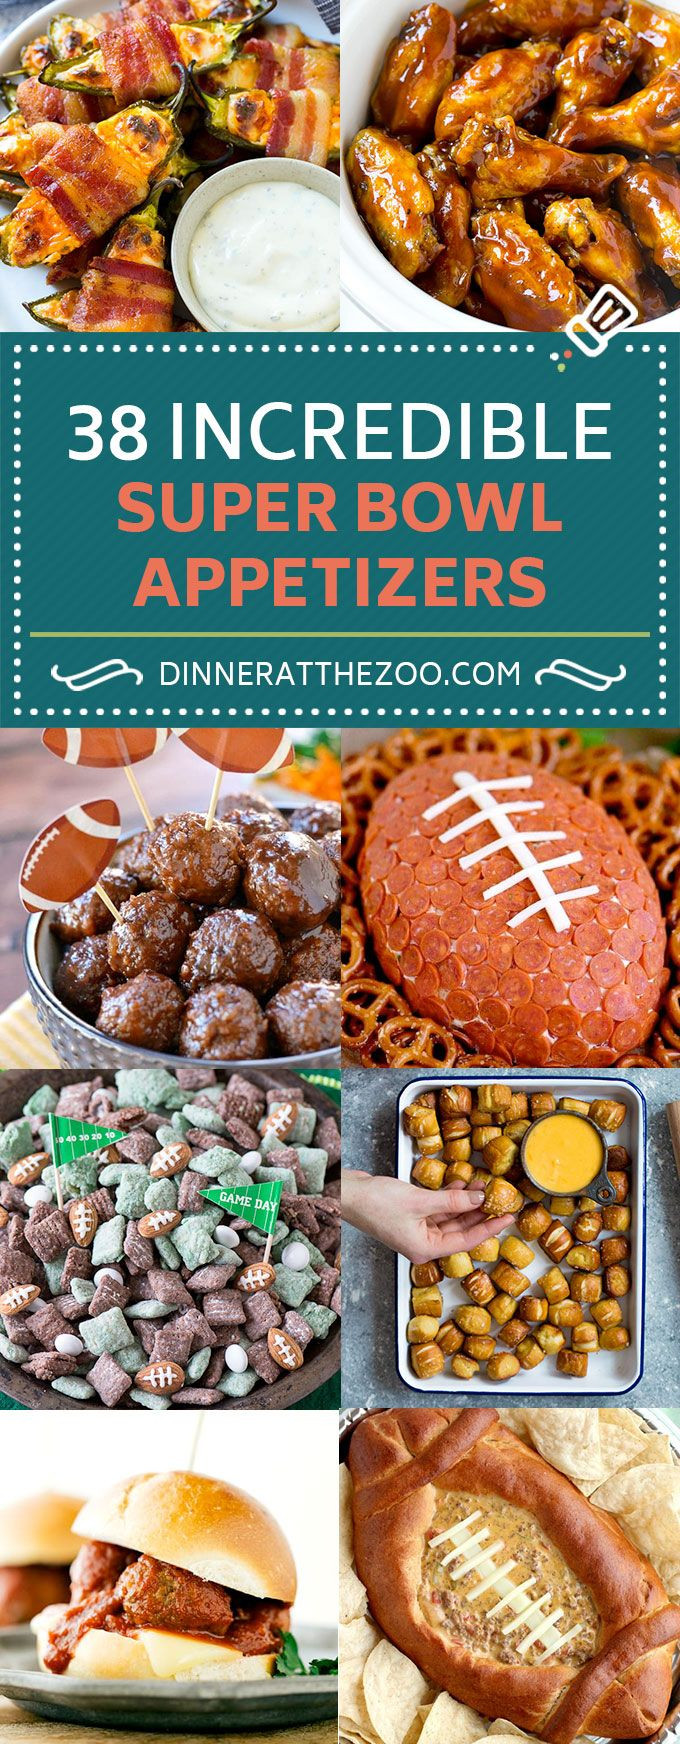 Superbowl Healthy Appetizers
 38 Super Bowl Appetizer Recipes in 2019